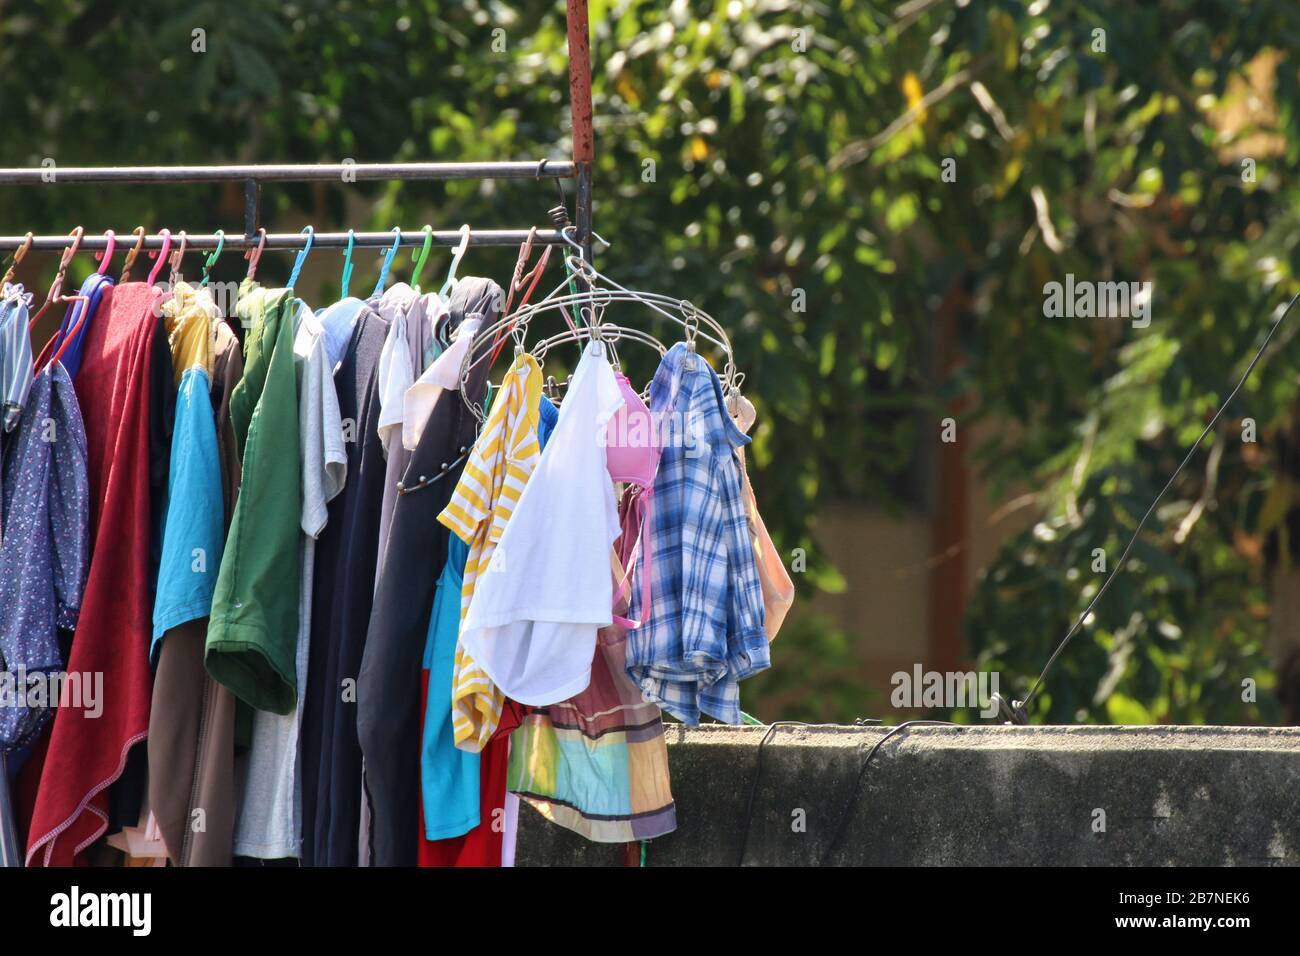 Clothes line, outdoor sunlight outdoors, hang clothes launch day